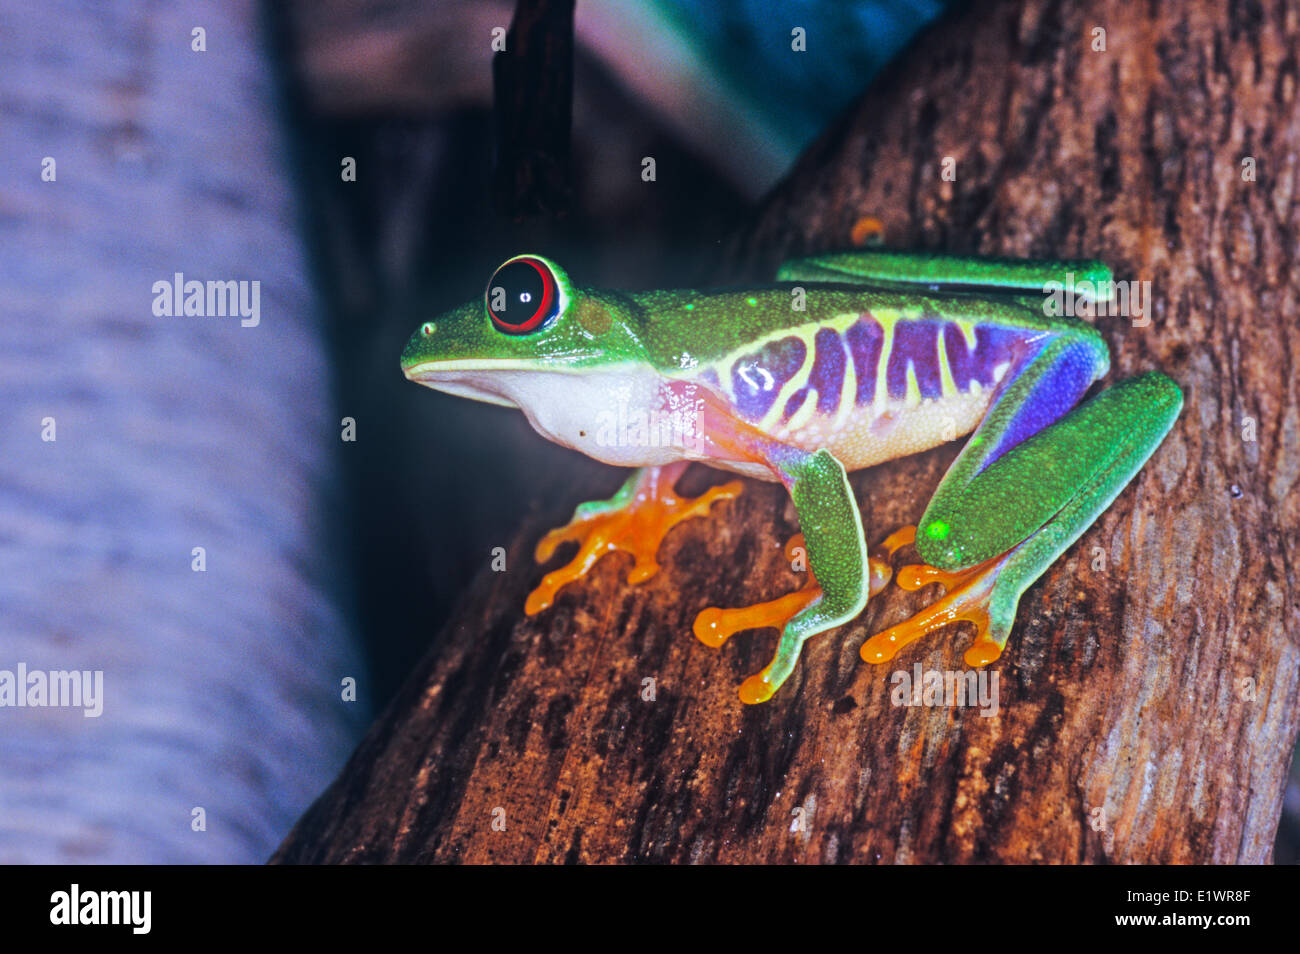 Agalychnis callidryas Red-eyed Leaf frog Amphibian Hylidae Tree Frogs Costa Rica Amphibia Frogs Toads Anura Rainforest Stock Photo